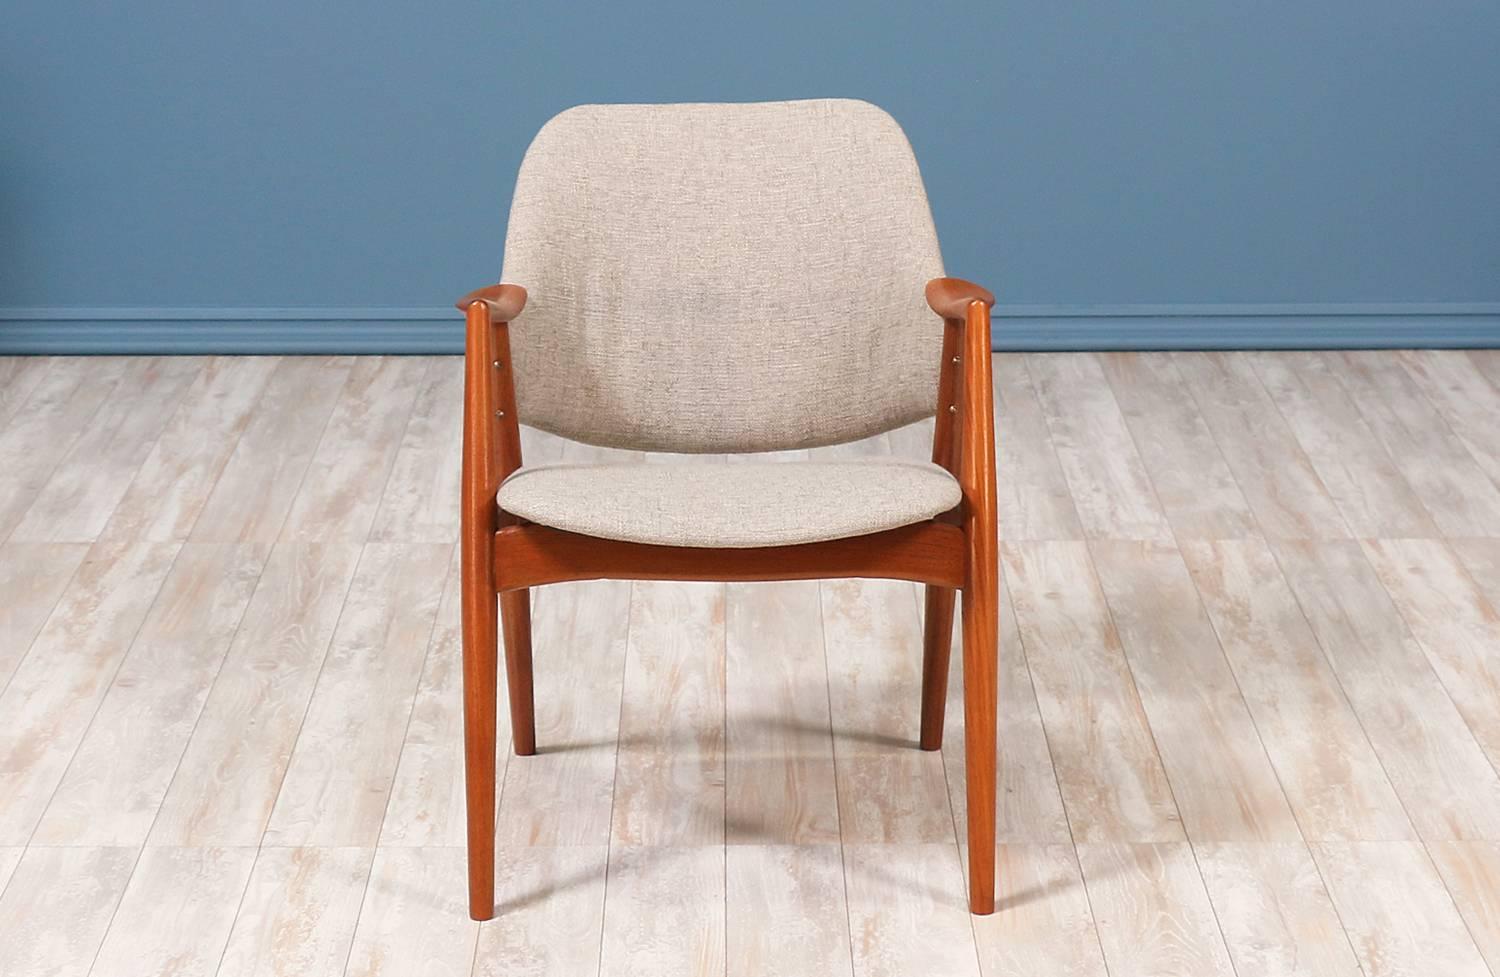 Swedish Modern “Kontur” armchair designed by Alf Svensson for Dux of Sweden in the 1950’s. This armchair features a teak wood frame with clean lines and tapered, angled legs. The seat and backrest have been upholstered in a muted grey soft tweed